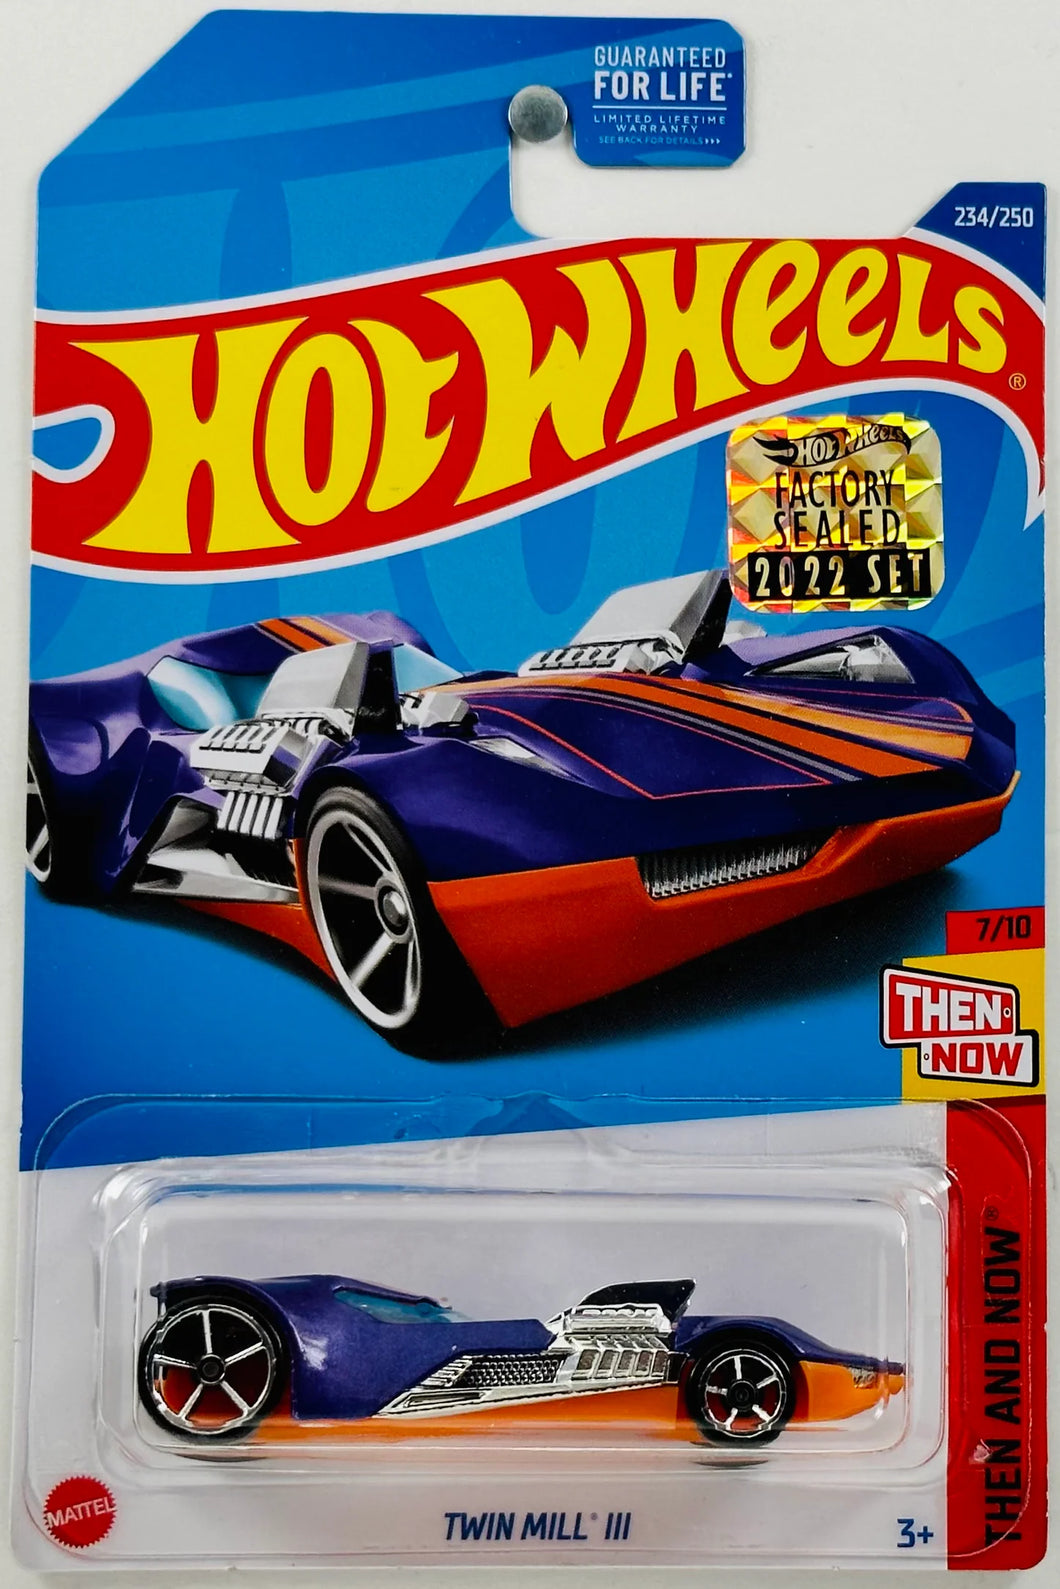 2022 Hot Wheels Twin Mill III Then and Now 7/10 234/250